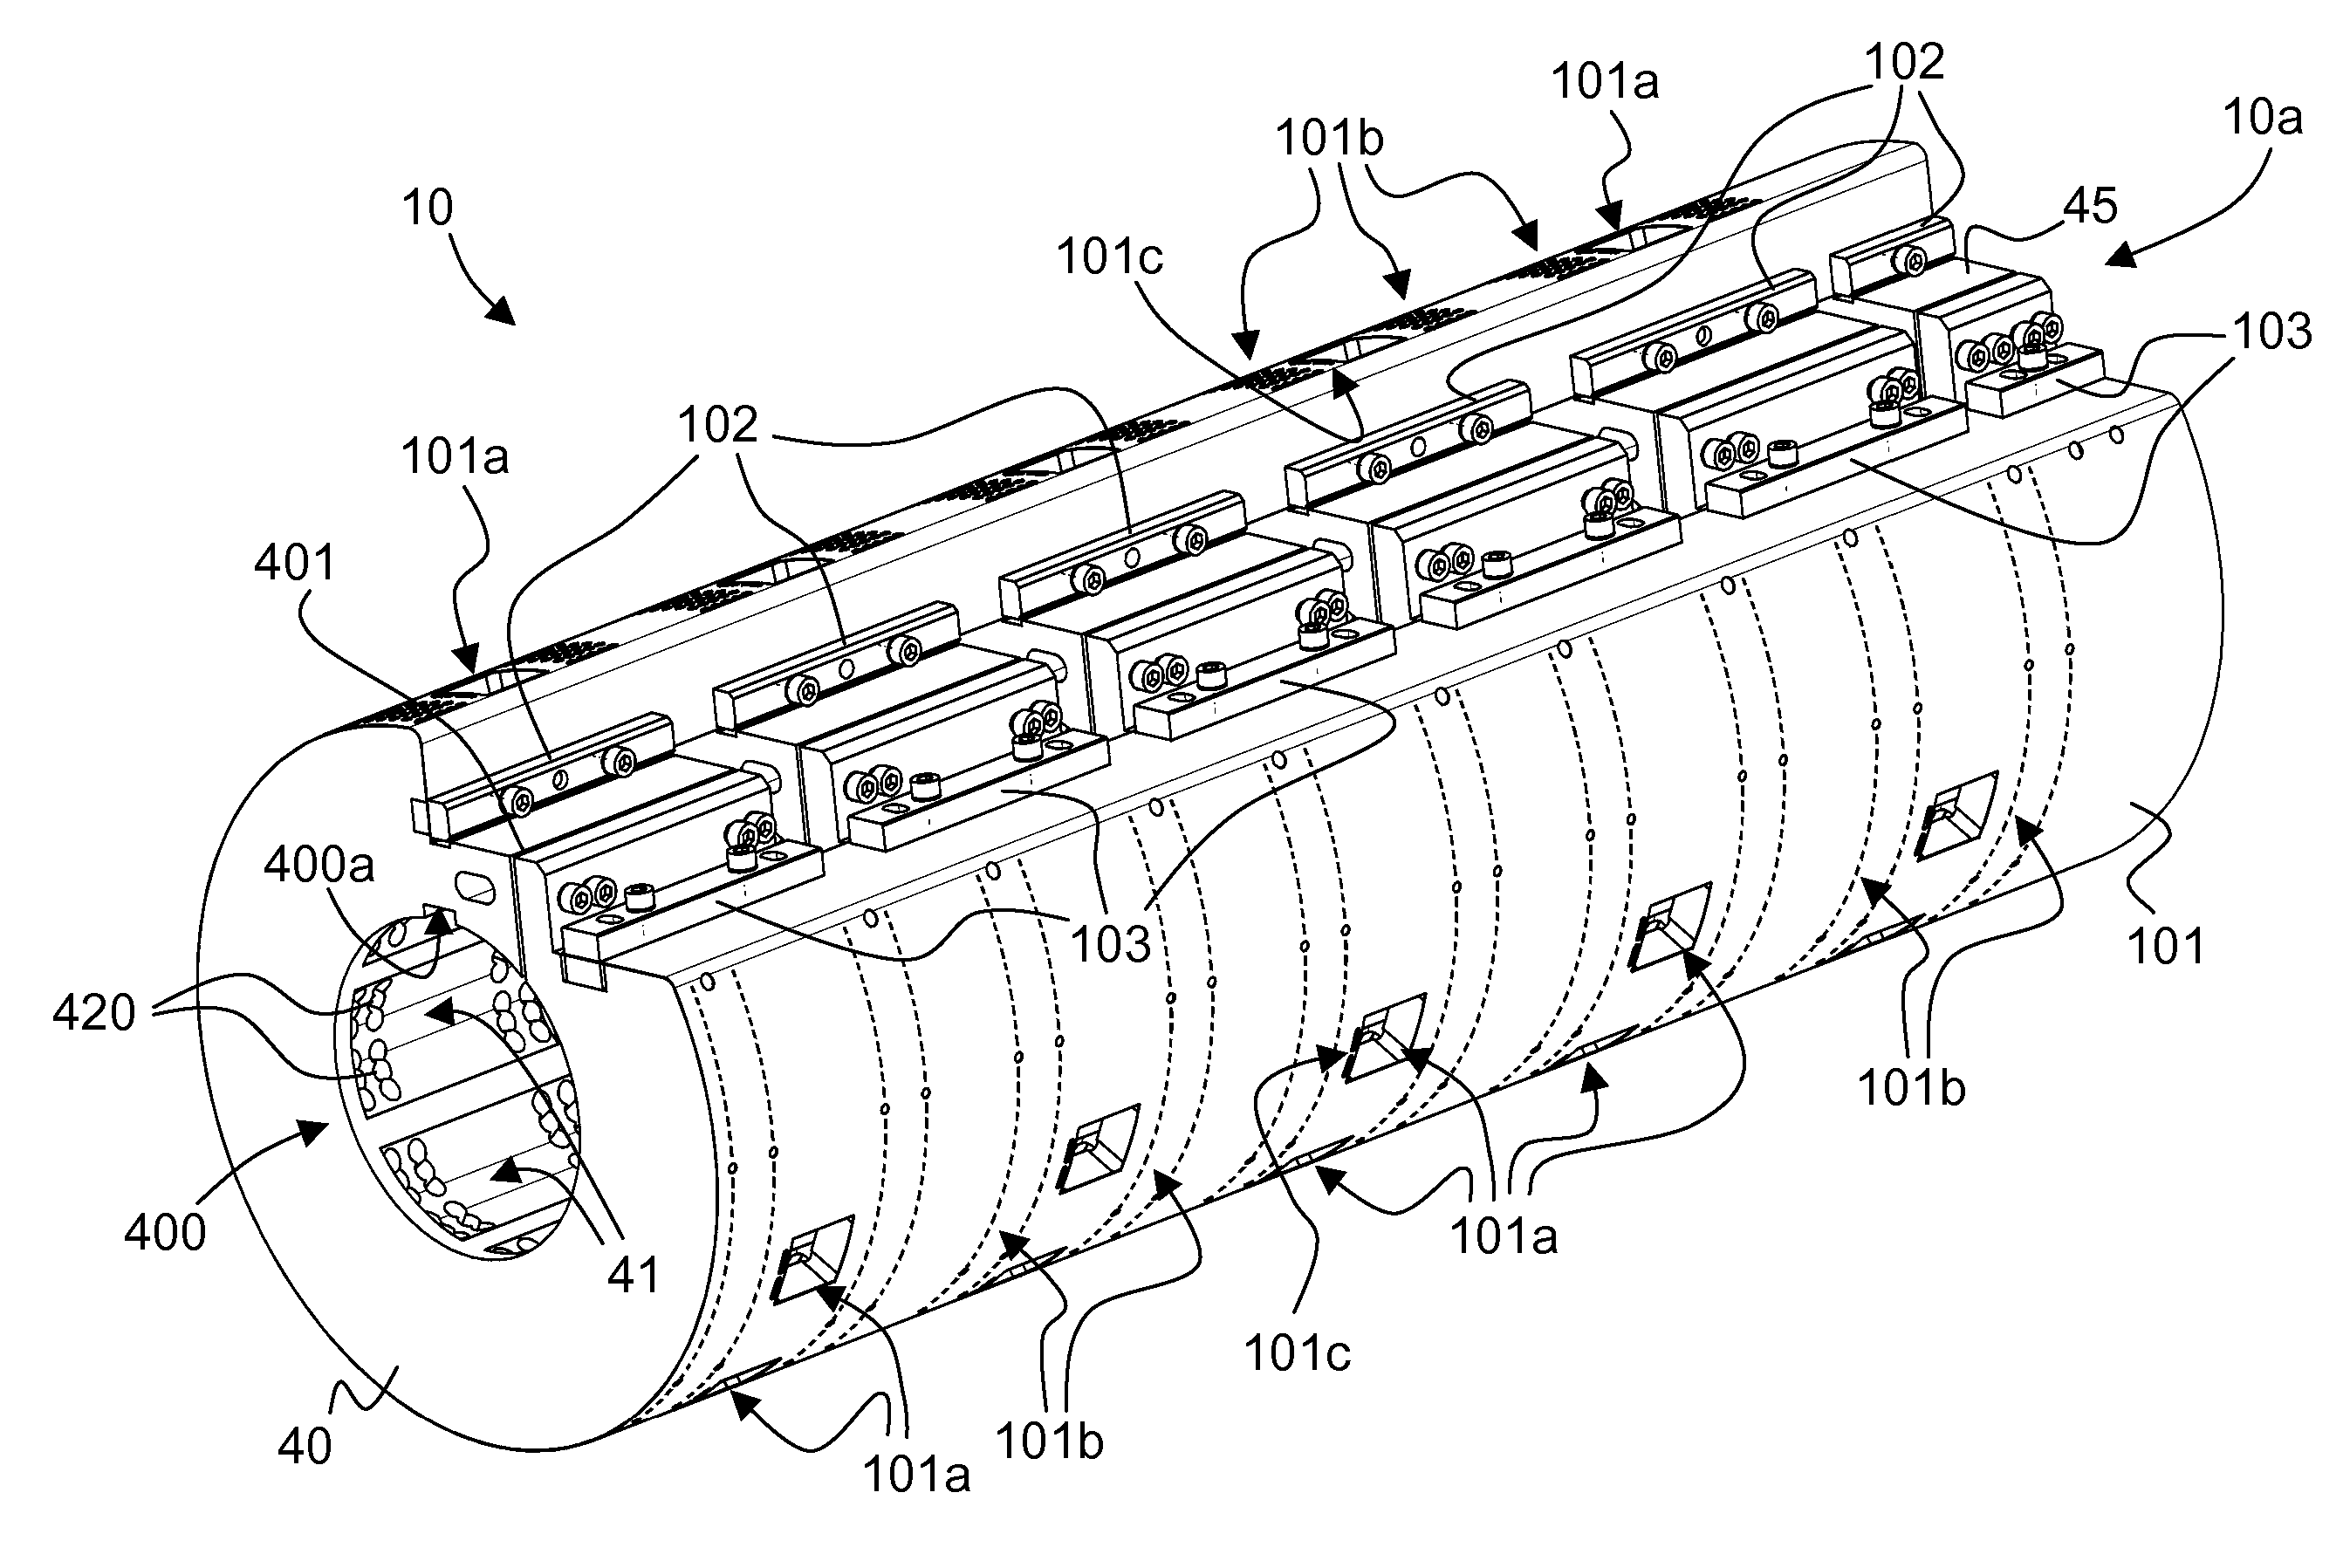 Cylinder Body for Orienting Magnetic Flakes Contained in an Ink or Varnish Vehicle Applied on a Sheet-Like or Web-Like Substrate